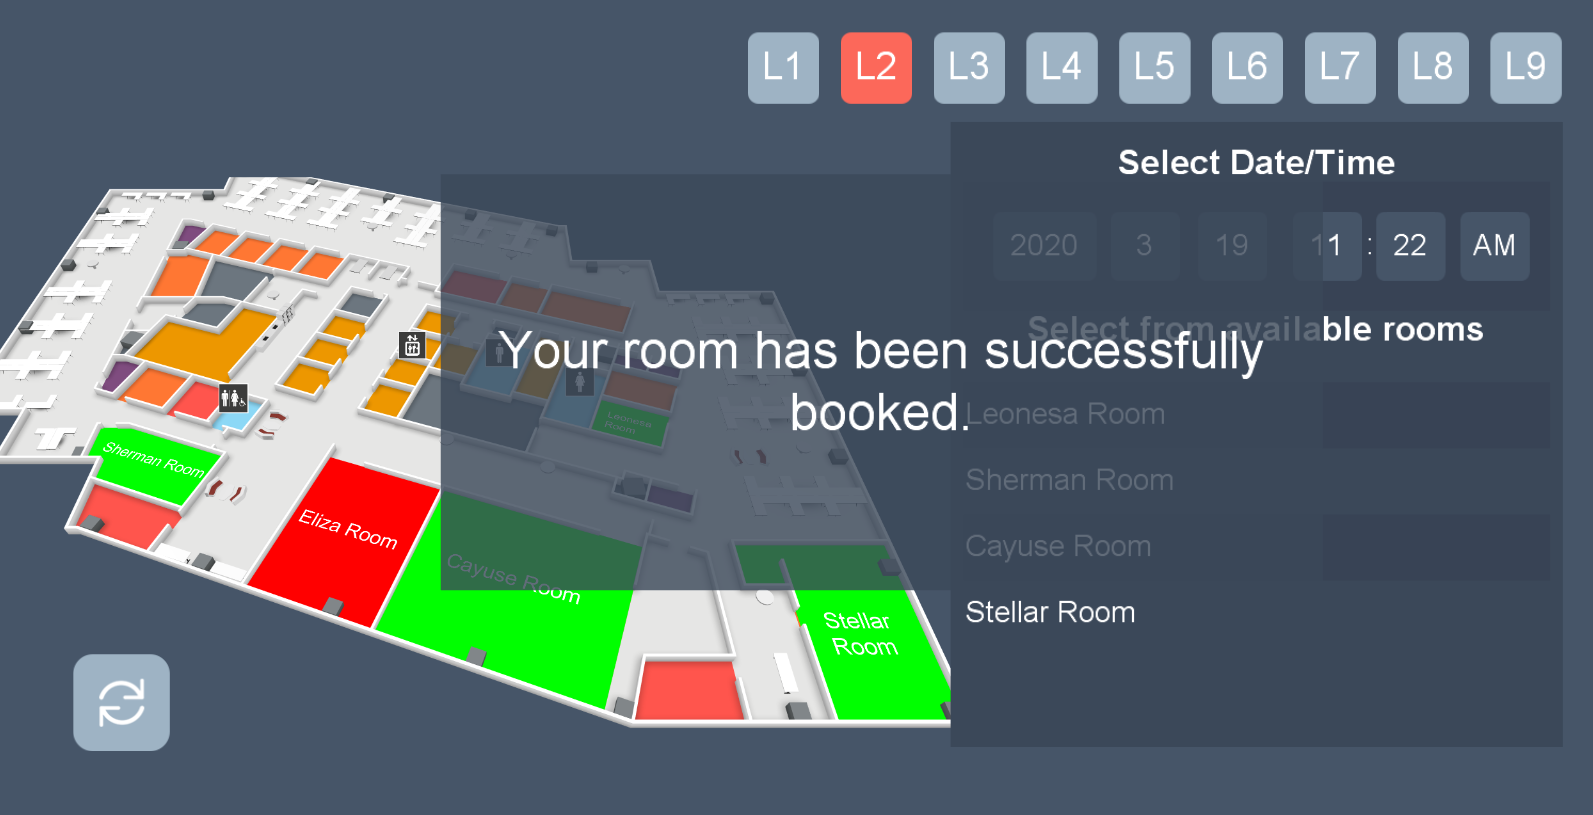 Interactive wayfinding with room booking and hotdesking, 22Miles allows limitless integrations with the tools you need for content management and providing users with immersive experiences within any facility.